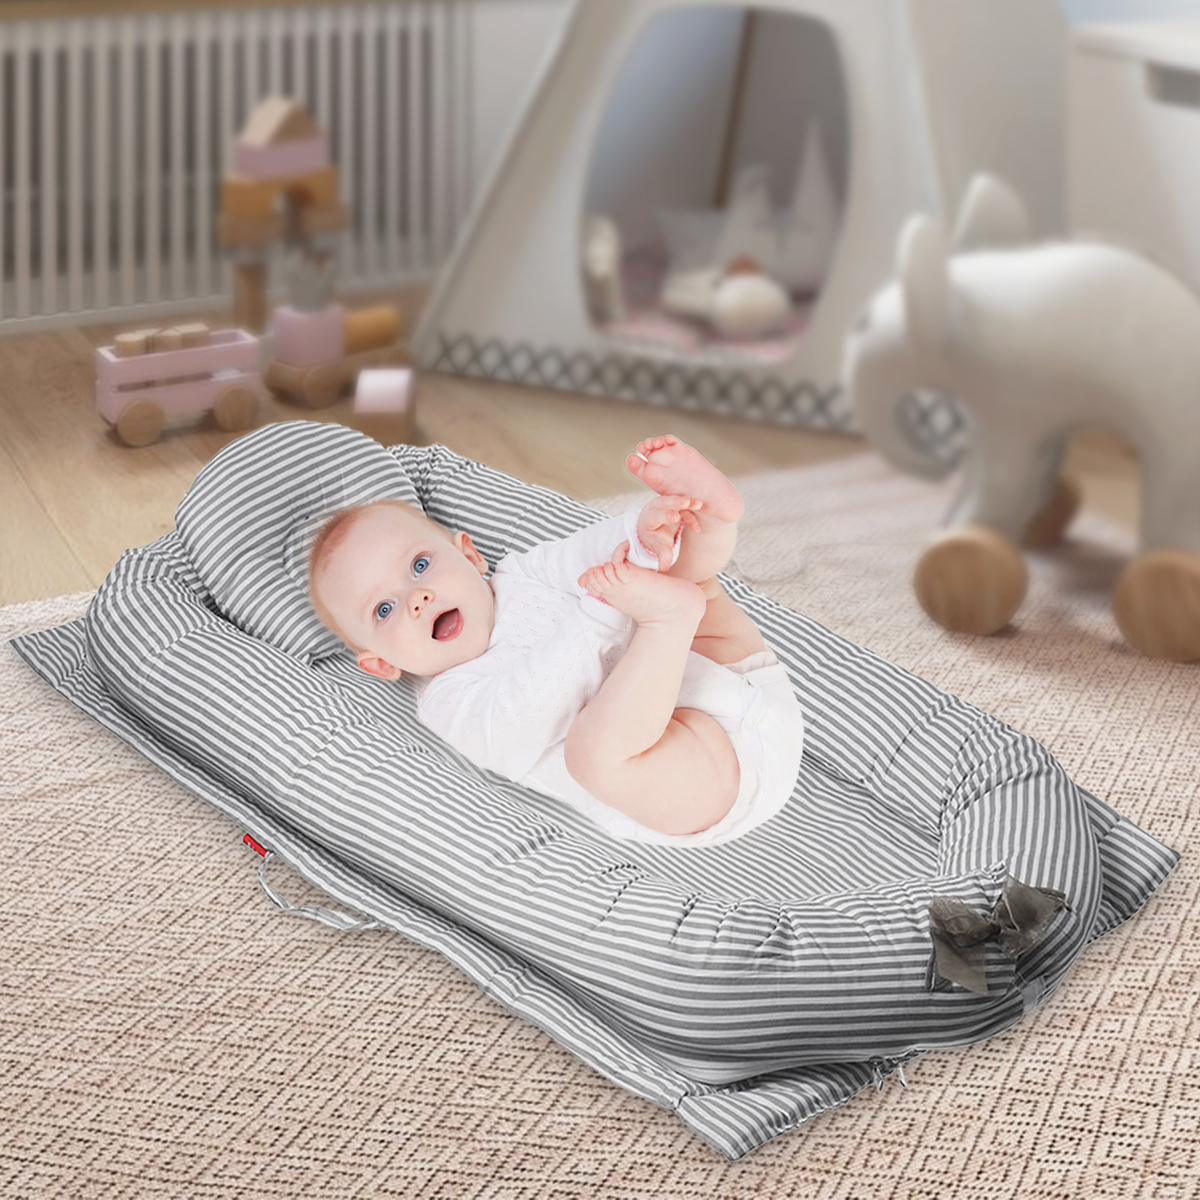 Folding-Baby-Bed-Portable-Kids-Sleeping-Basket-Portable-Infant-Sleeper-with-Bumper-Travel-1810330-12